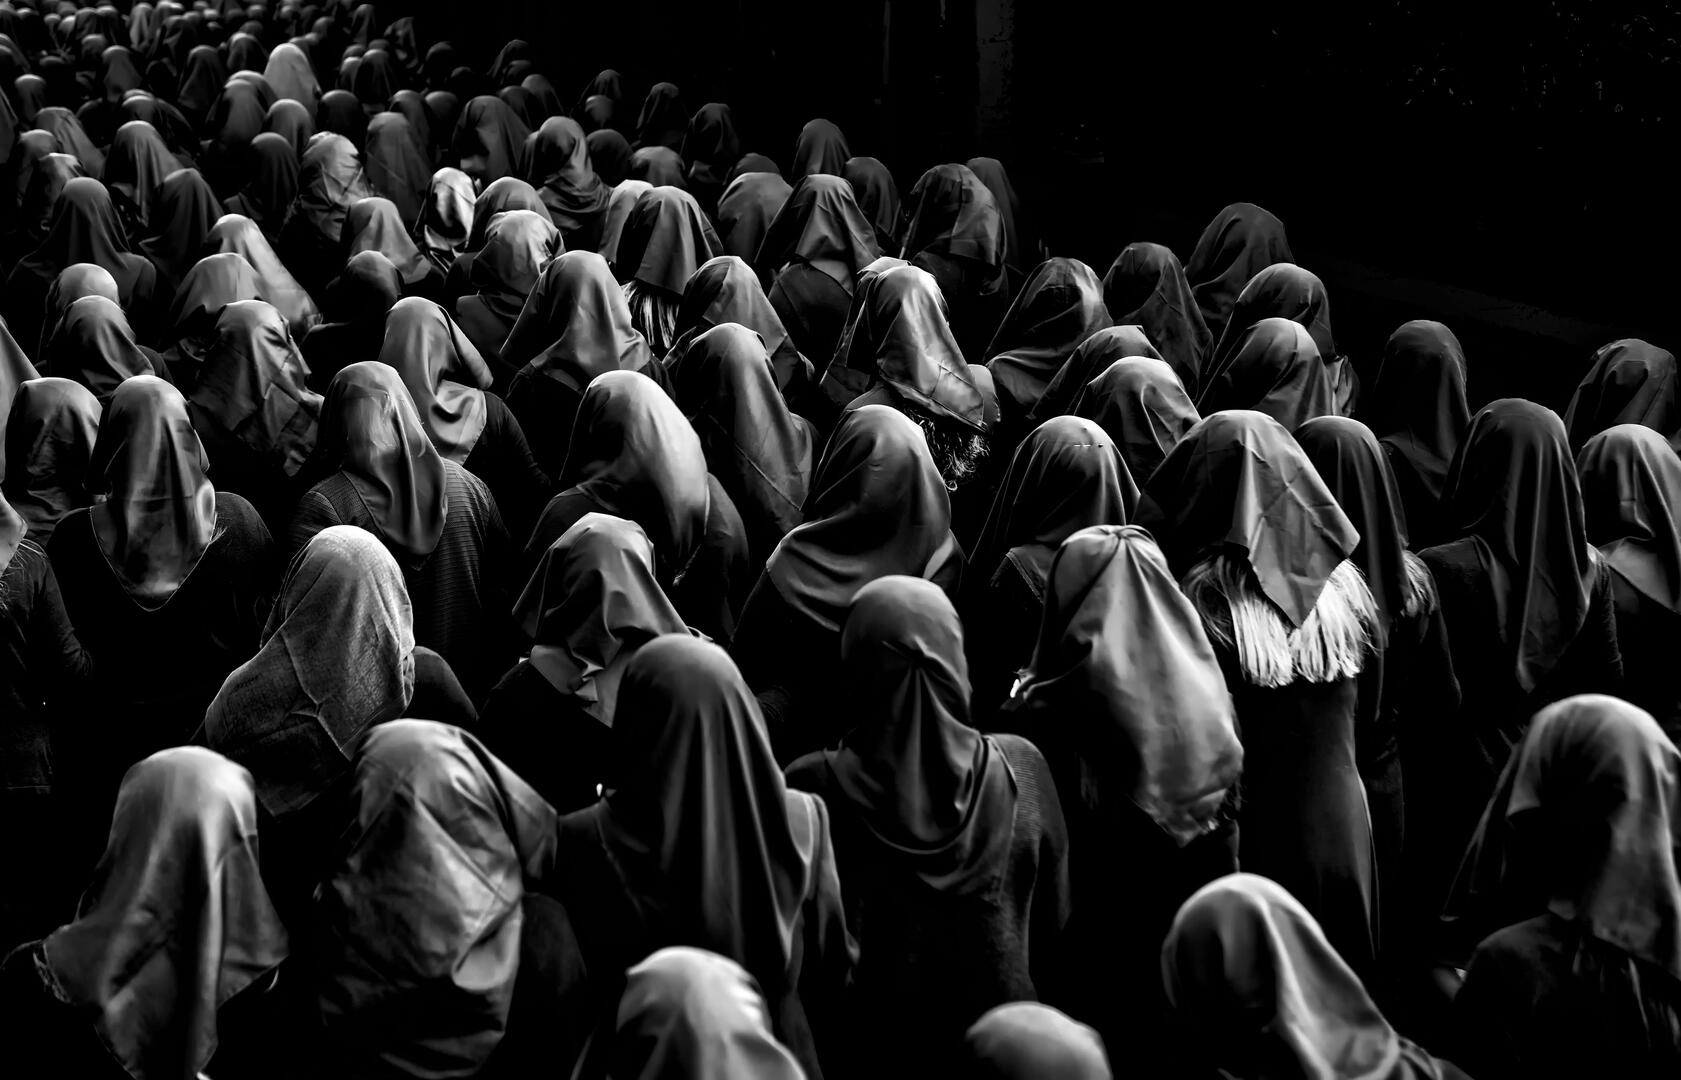 People Queuing in Black and White - Street photo contest | Photocrowd ...